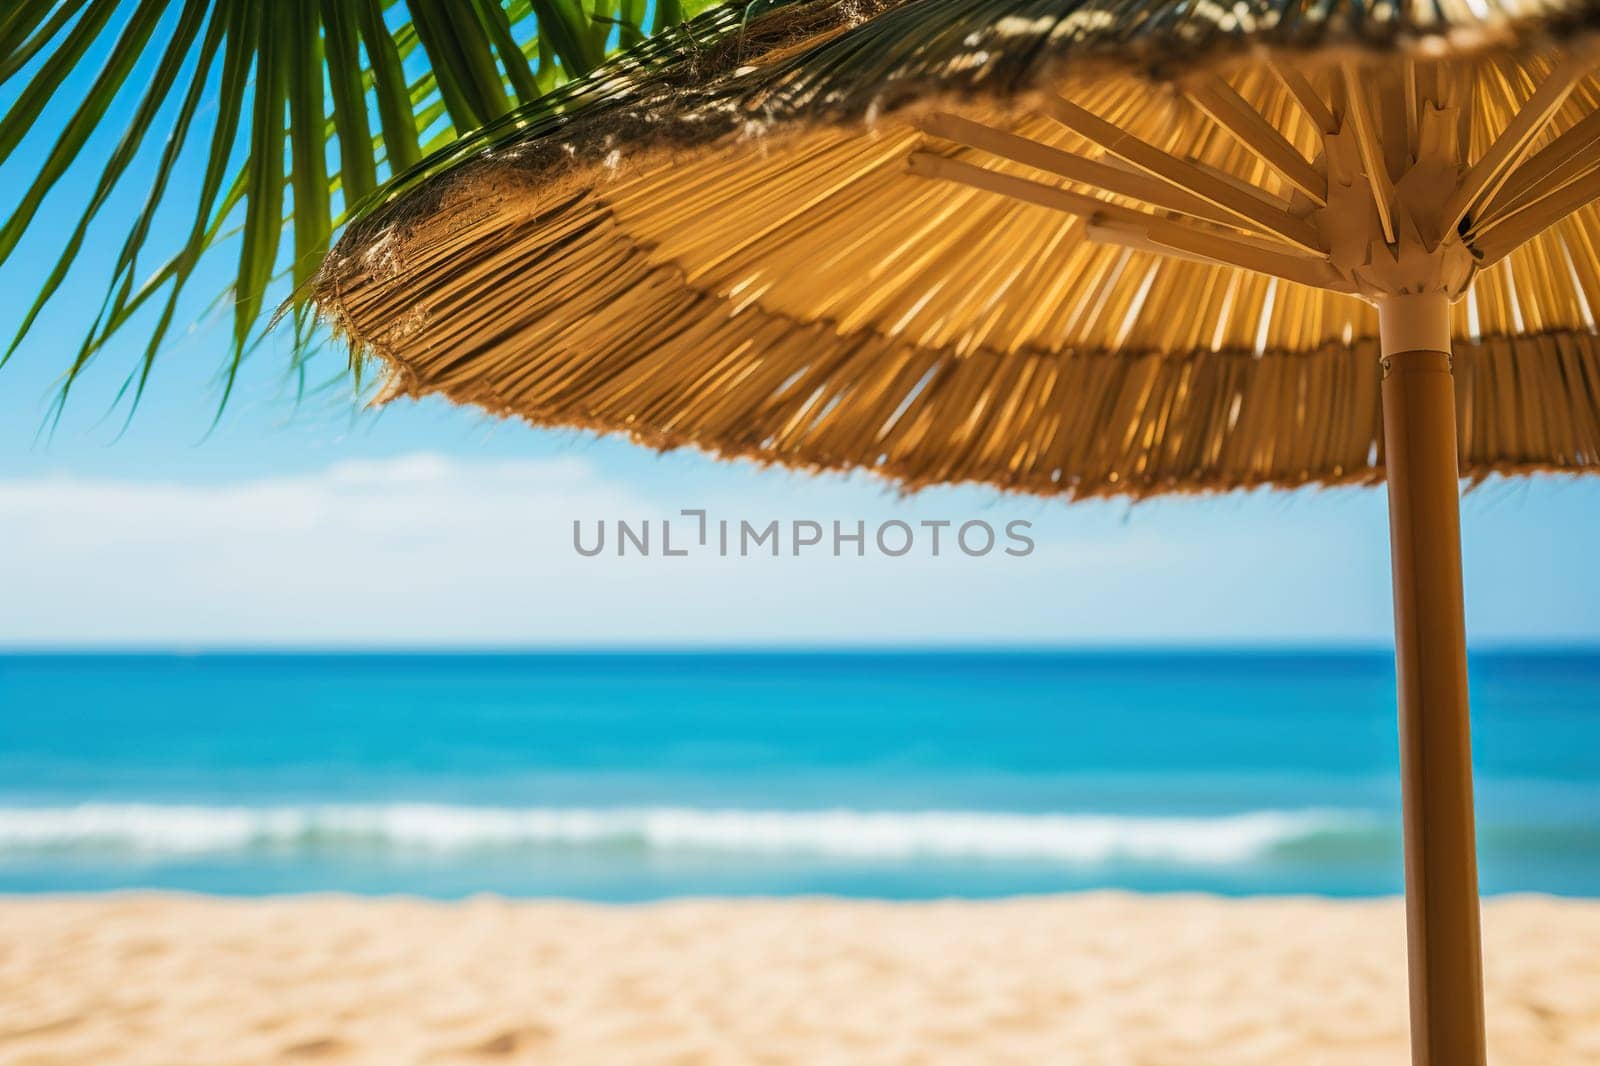 Palm leaves close-up against the backdrop of a seashore. Vacation, travel, beach holiday concept.